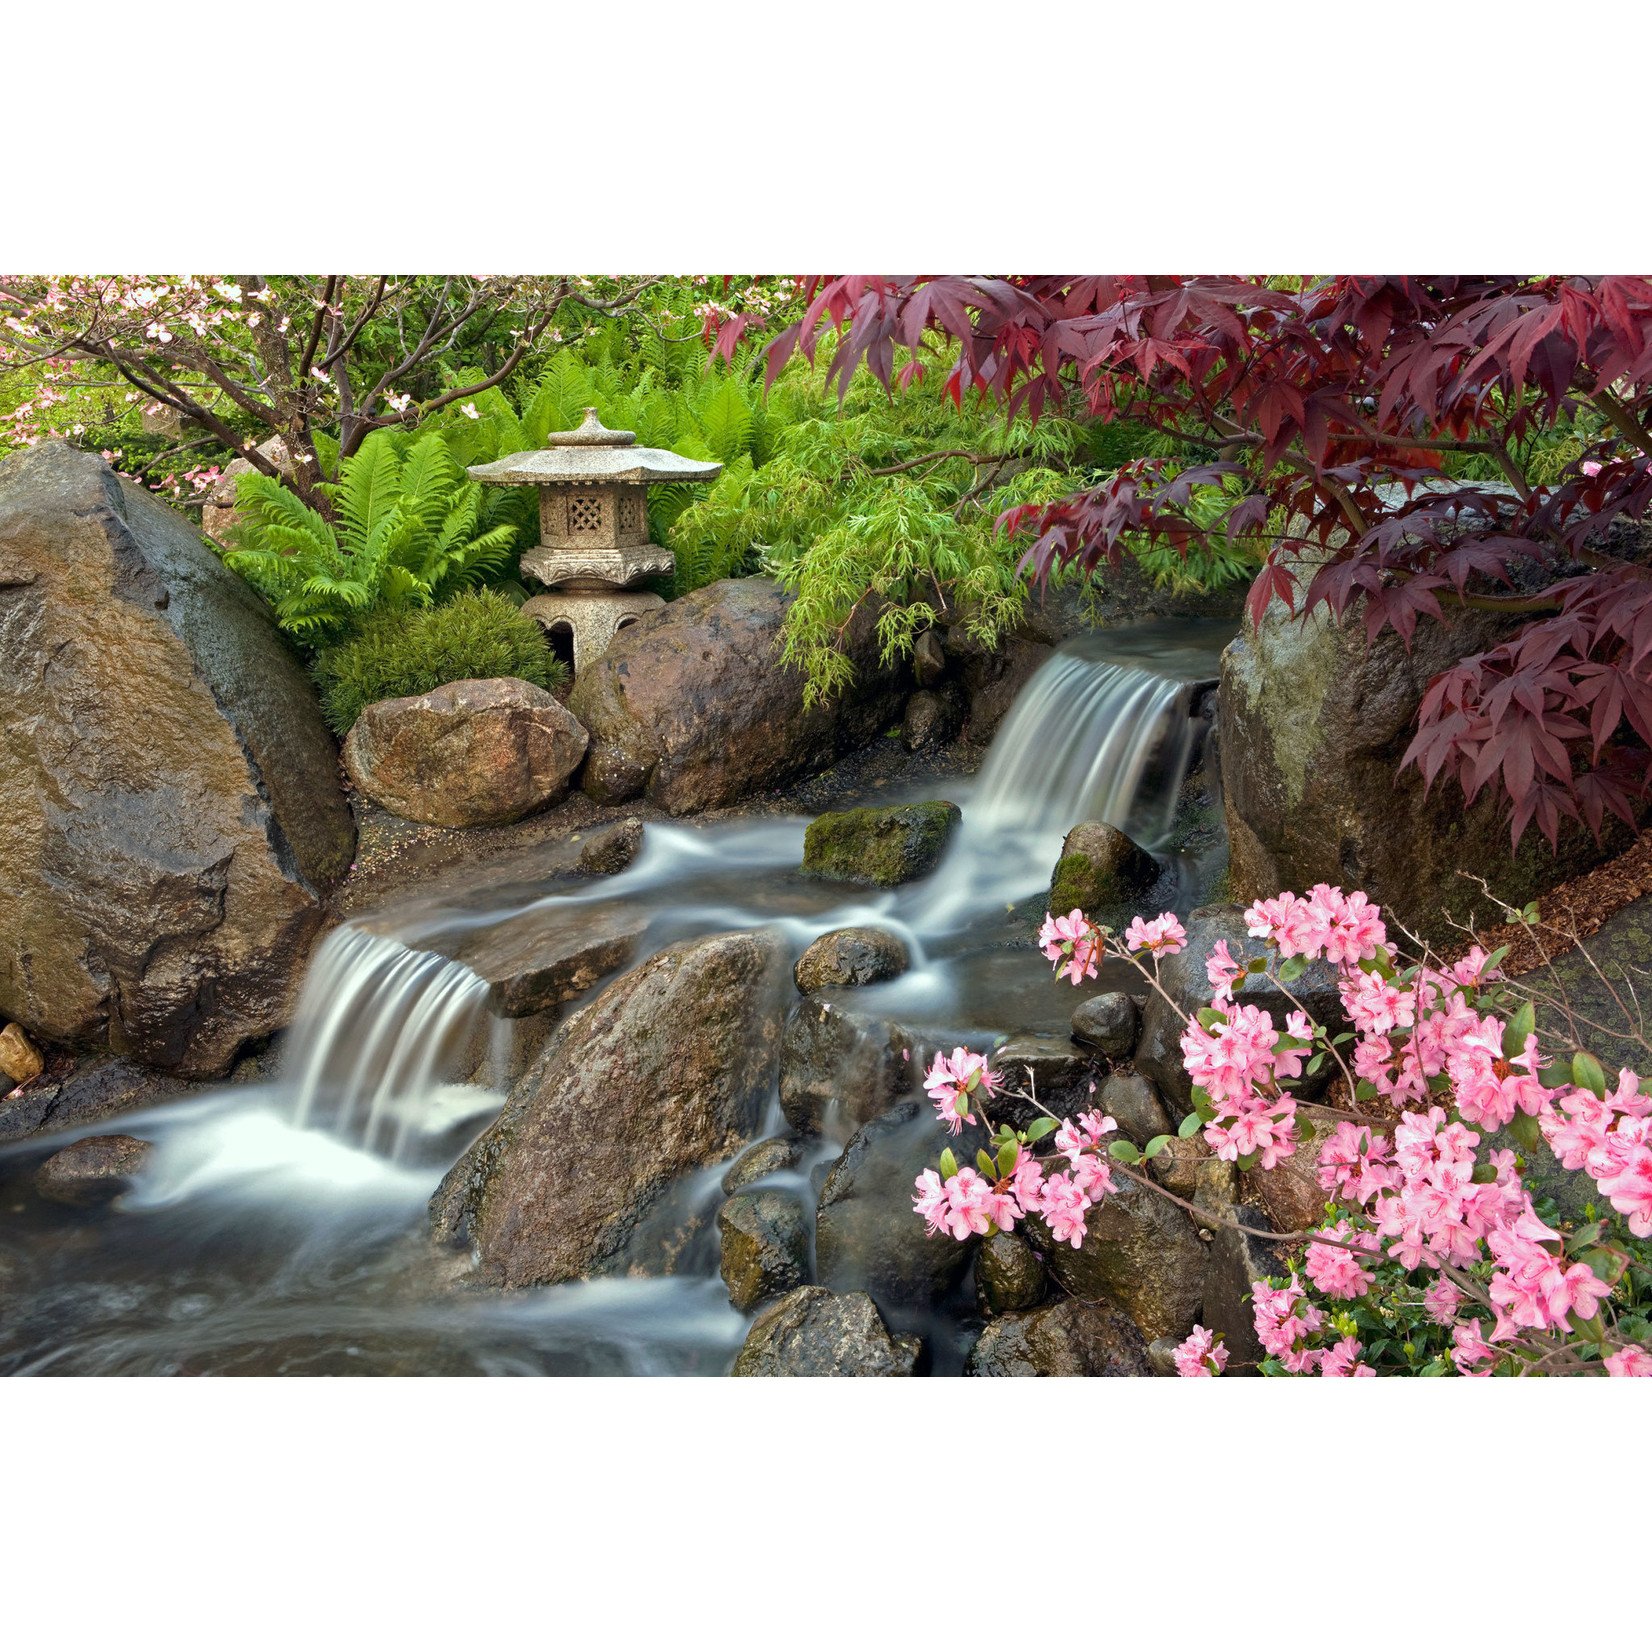 Anderson Japanese Gardens-Rockford $13.00 Adult (1) Day Admission